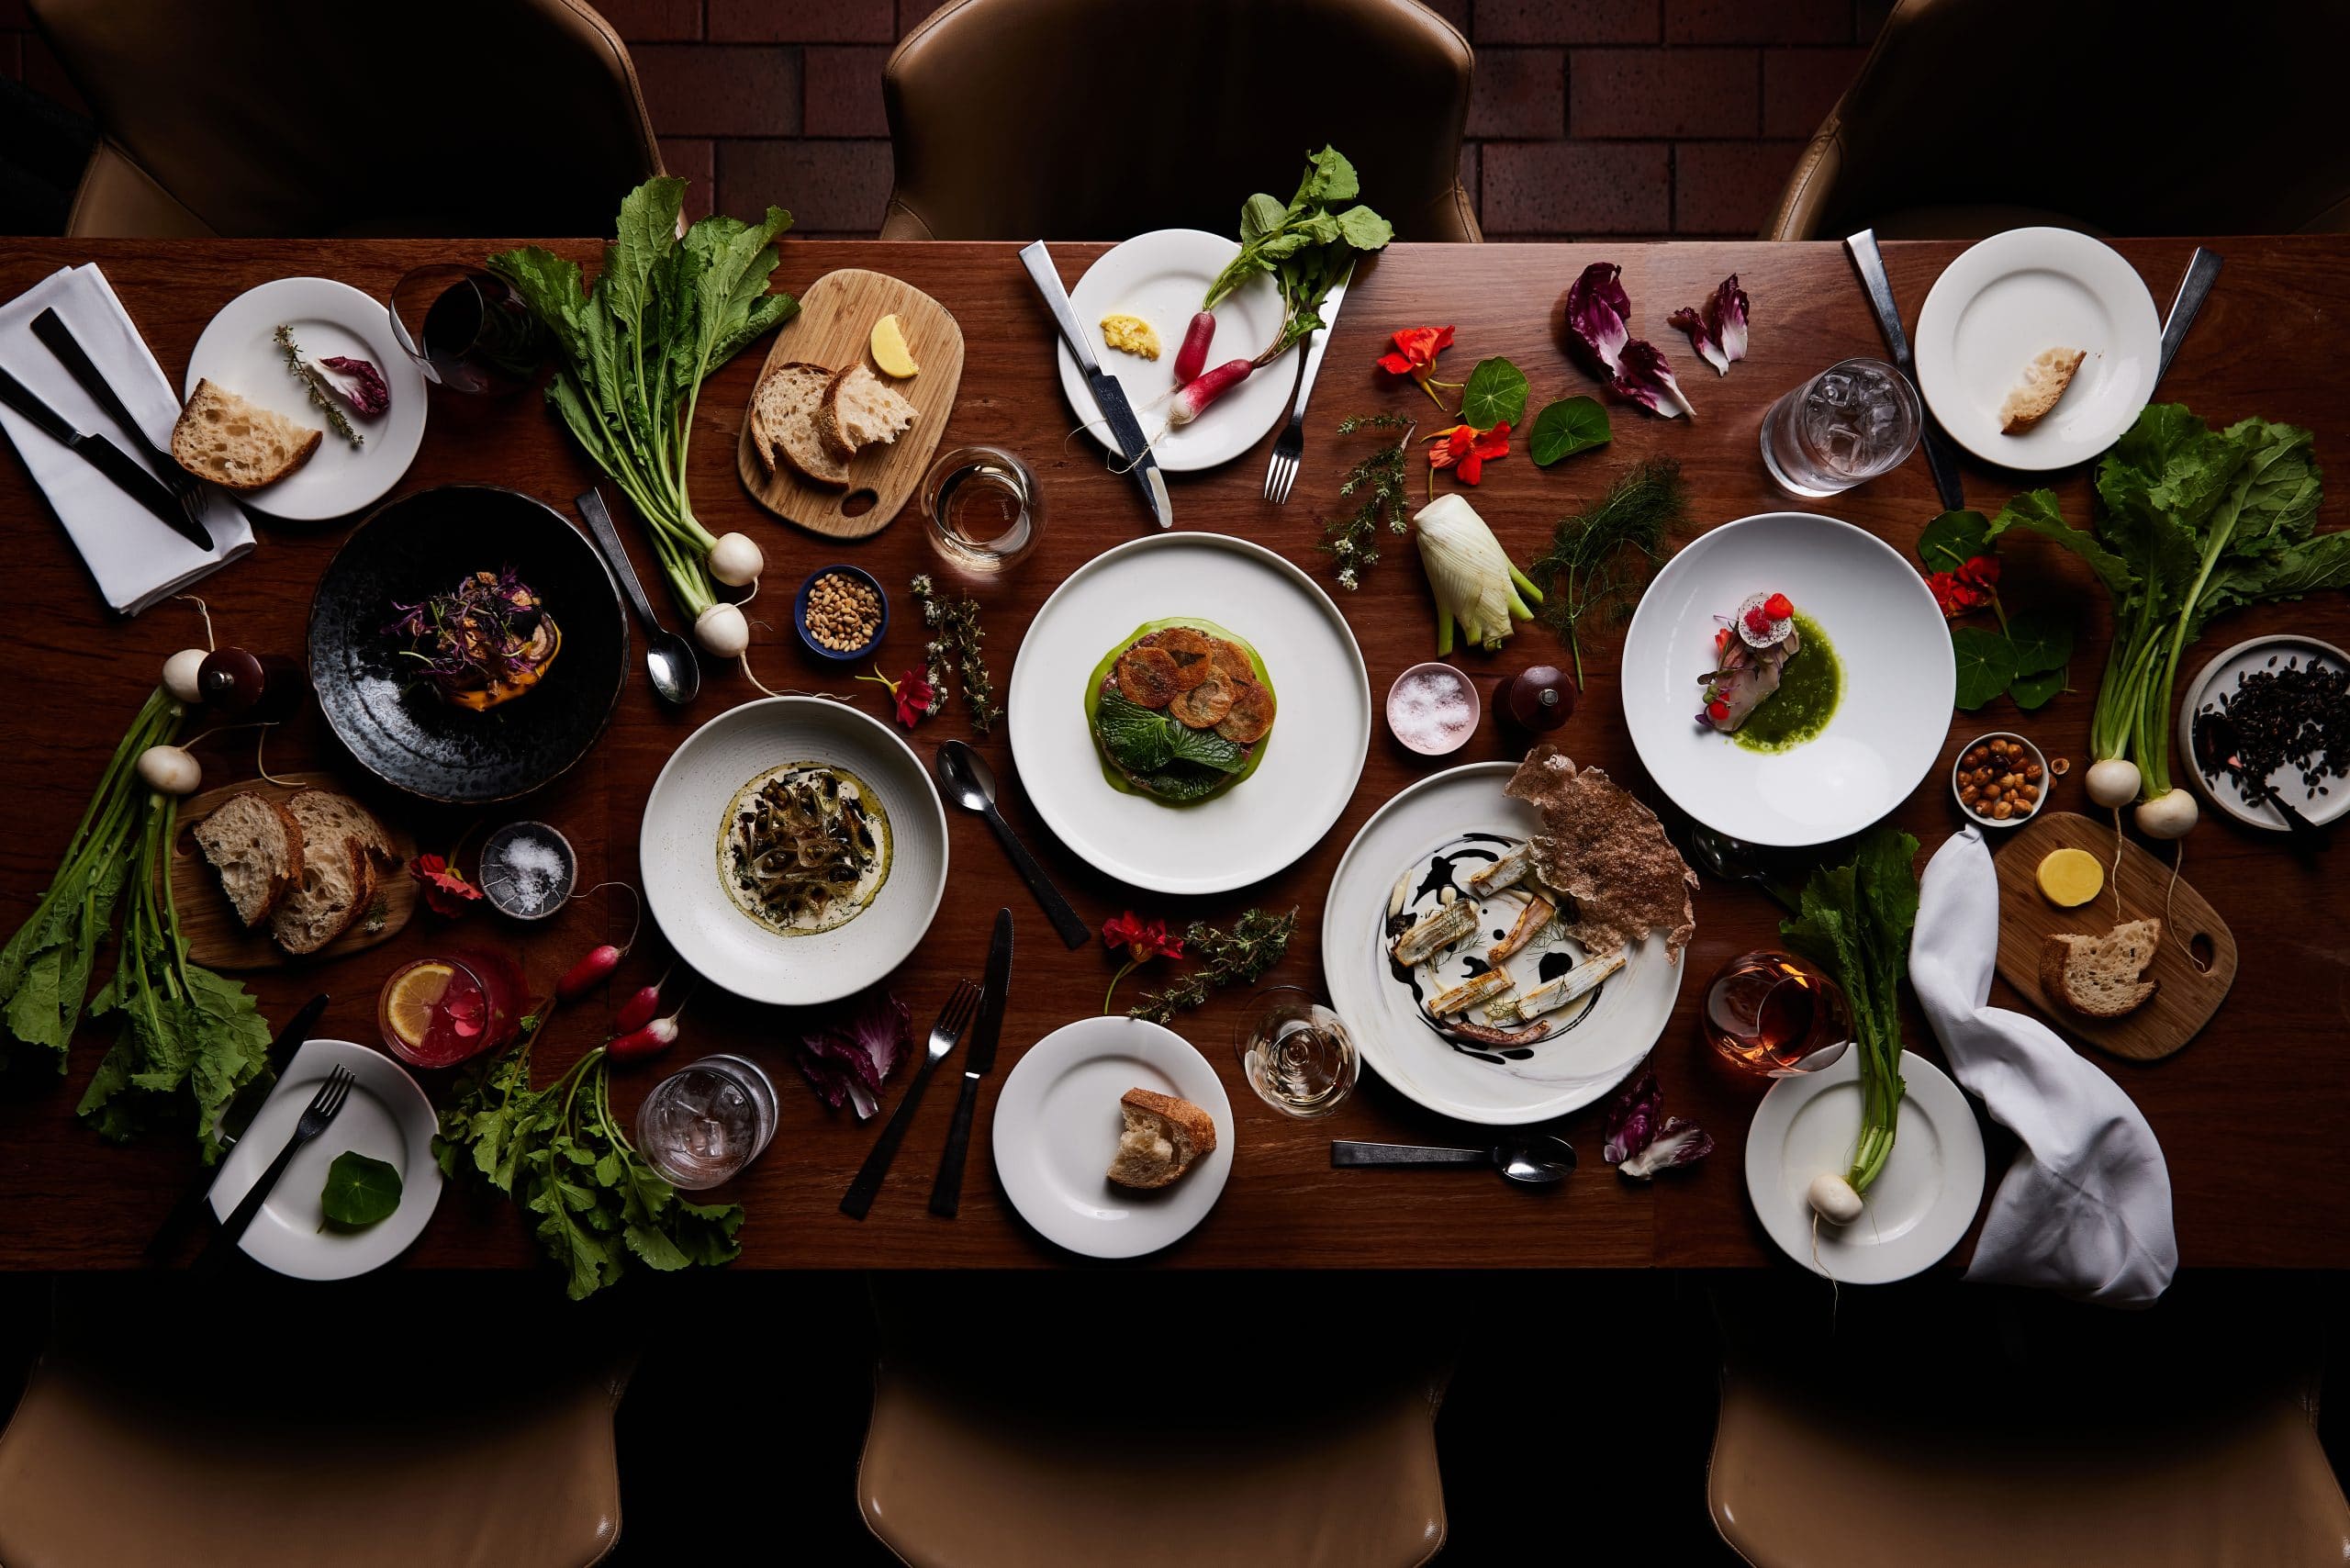 A table filled with a variety of plates containing delicious food and an assortment of colourful vegetables.